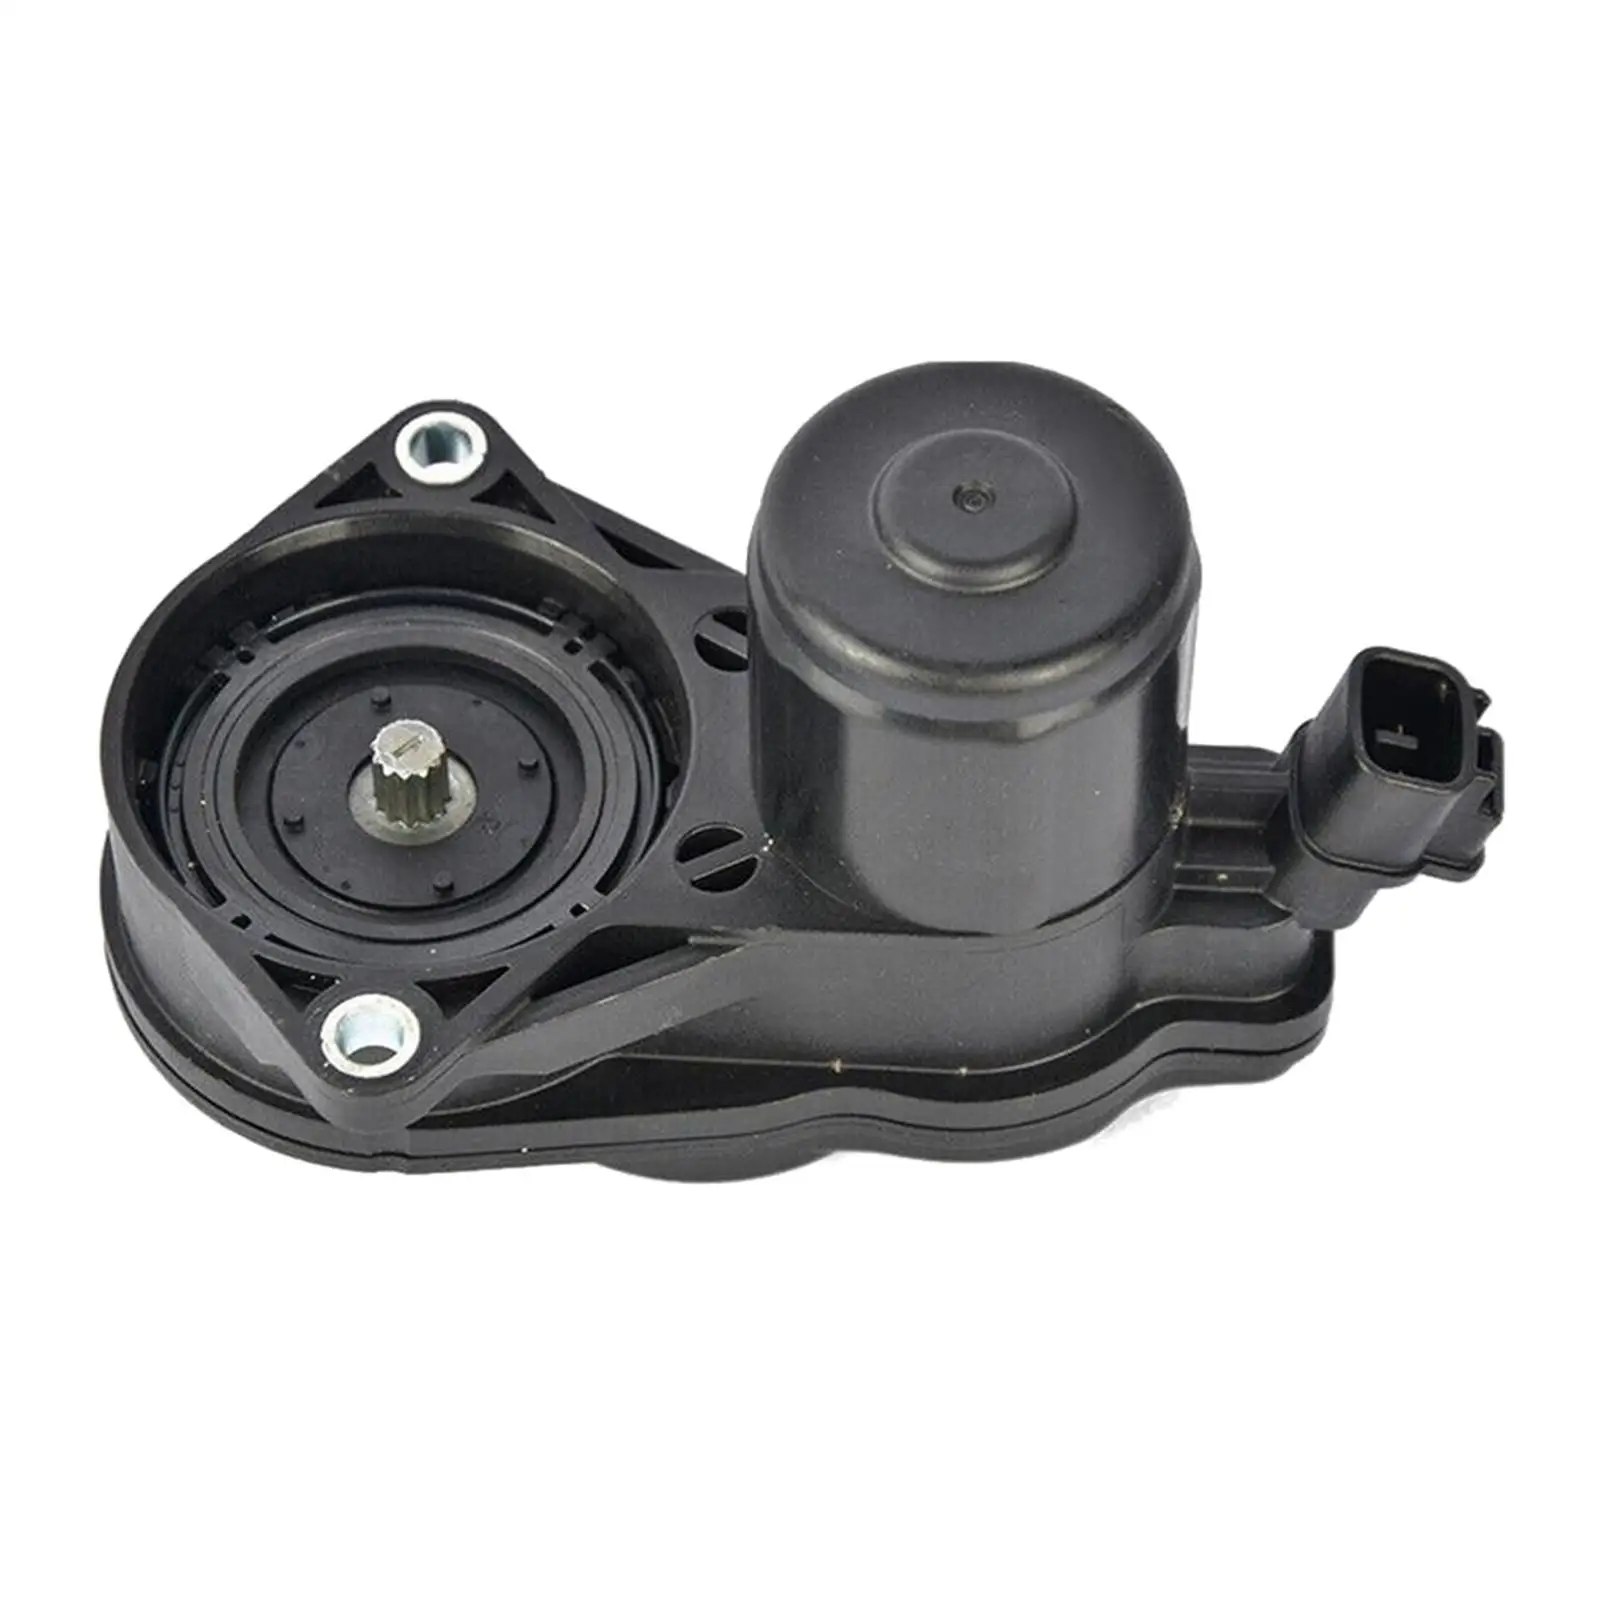 Parking Brake Actuator Assembly 46310-33010 for Toyota for c-hr Venza